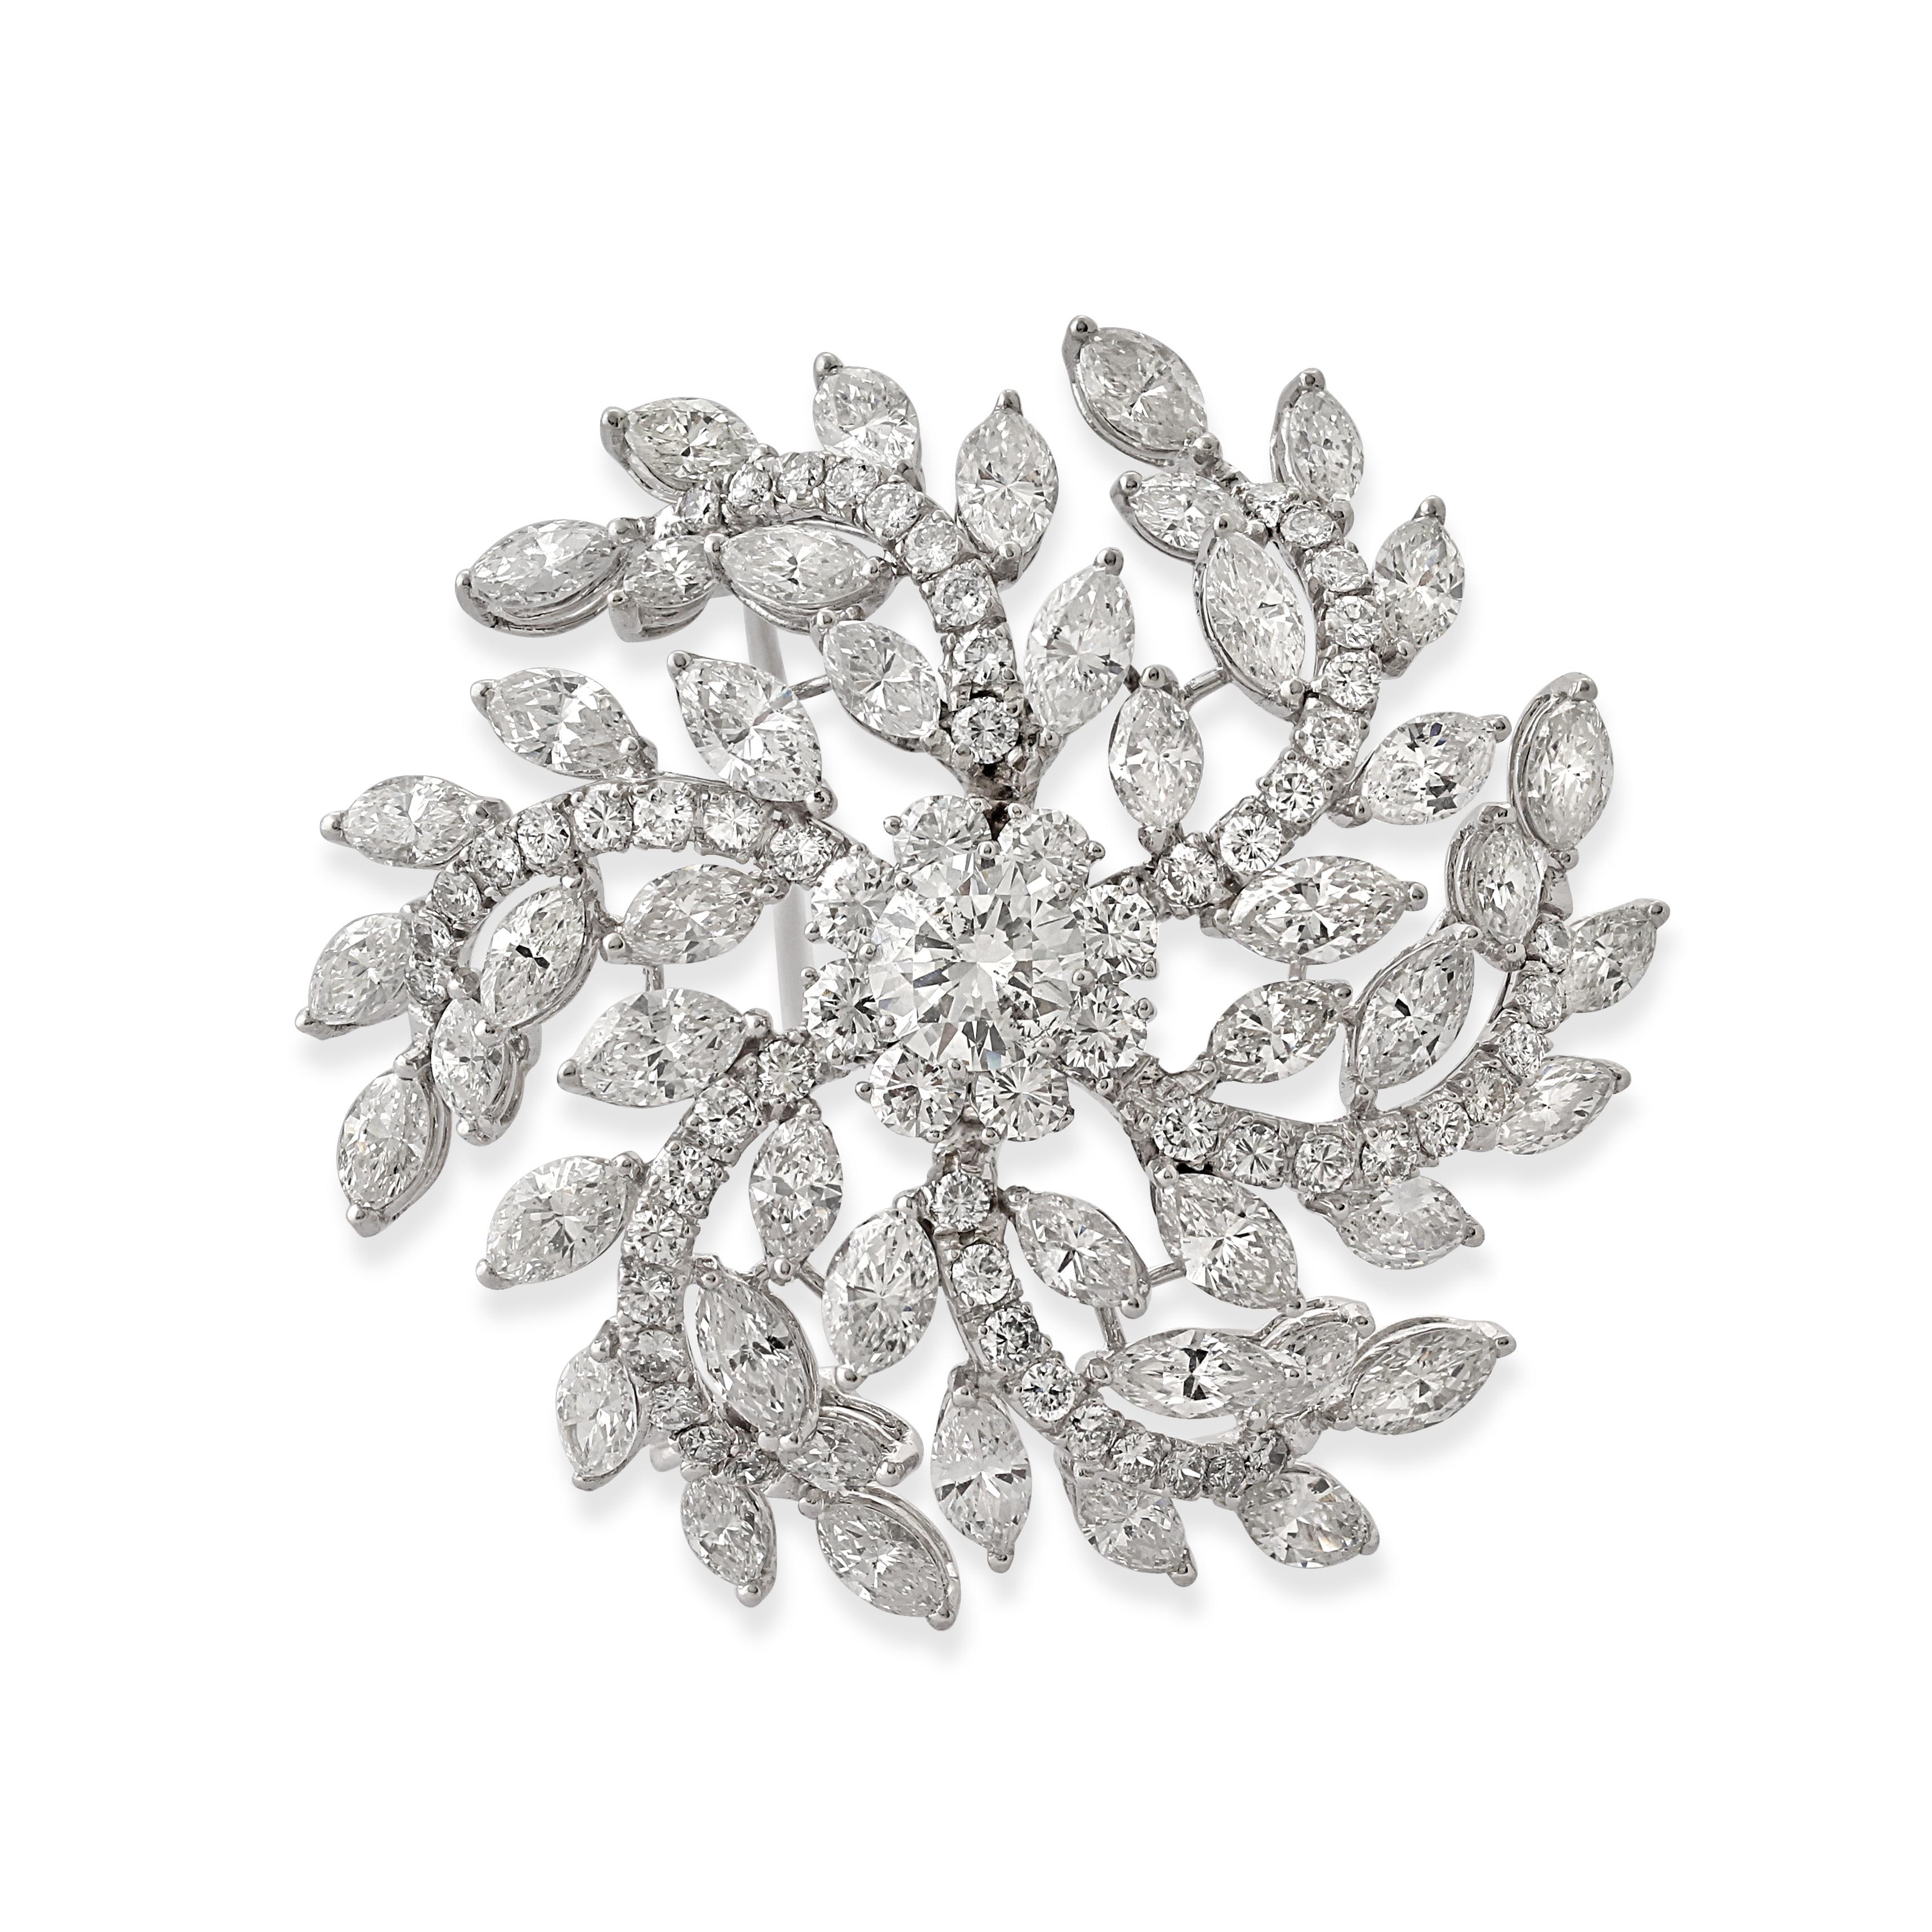 An 18k white gold and diamond floral brooch. Designed as swirled flowering branches that resemble a catherine wheel. Set at the centre with a circle-cut diamond with marquise-cut diamonds as leaves on the branches.